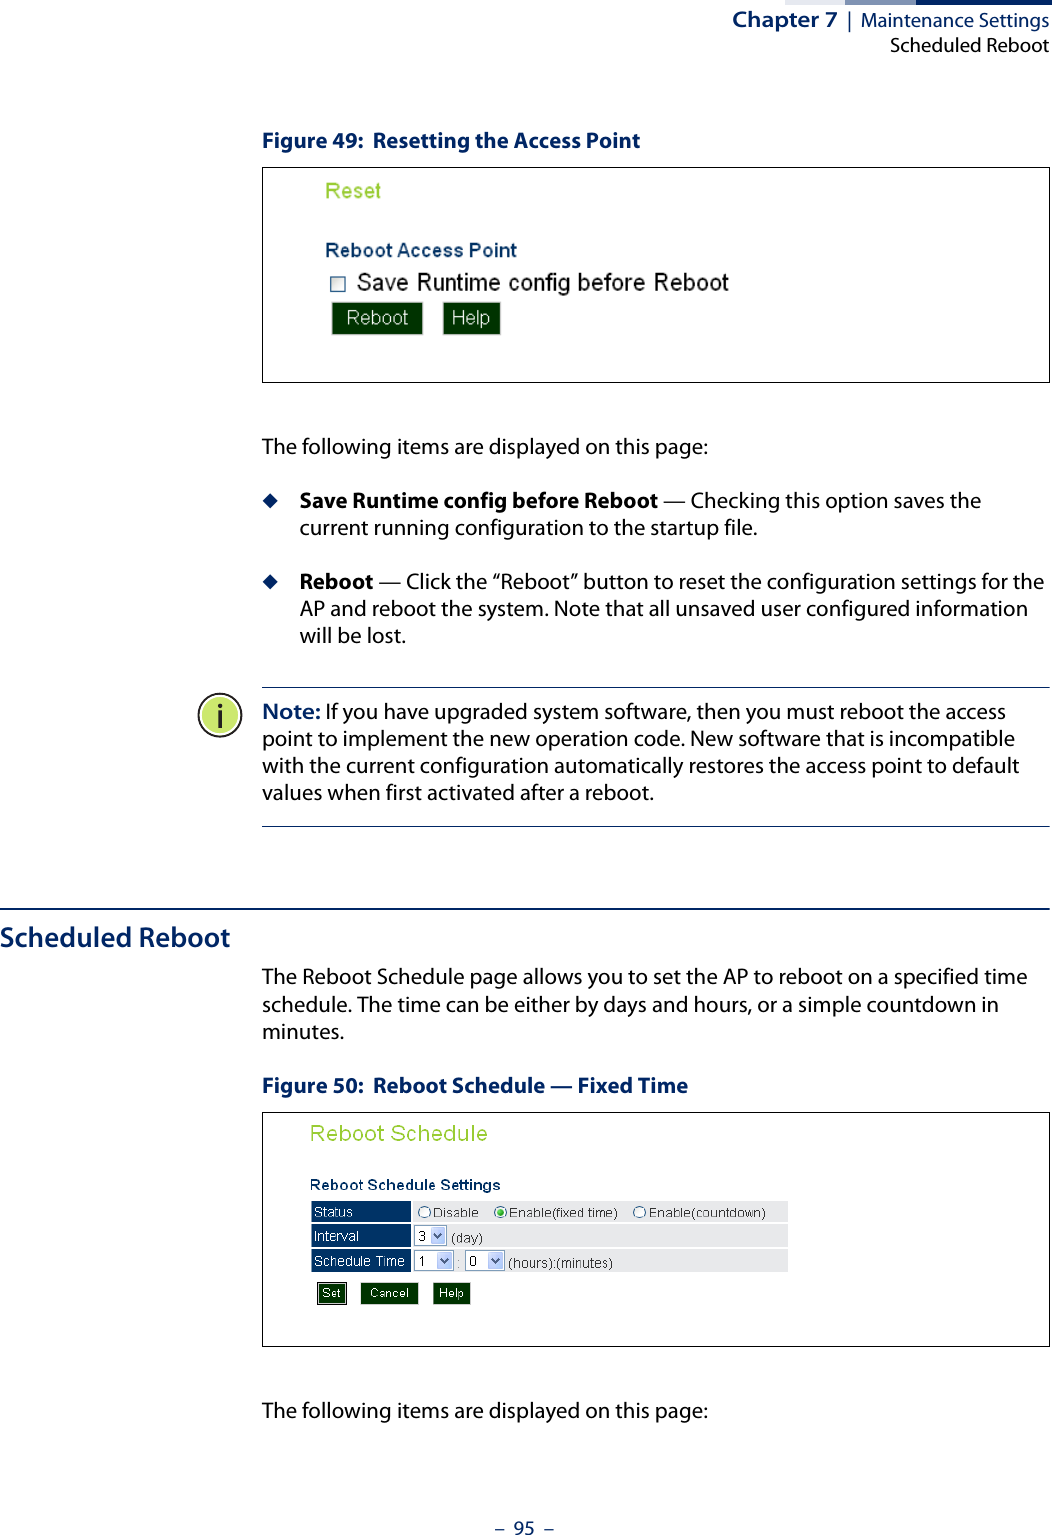 Chapter 7  |  Maintenance SettingsScheduled Reboot–  95  –Figure 49:  Resetting the Access PointThe following items are displayed on this page:◆Save Runtime config before Reboot — Checking this option saves the current running configuration to the startup file.◆Reboot — Click the “Reboot” button to reset the configuration settings for the AP and reboot the system. Note that all unsaved user configured information will be lost. Note: If you have upgraded system software, then you must reboot the access point to implement the new operation code. New software that is incompatible with the current configuration automatically restores the access point to default values when first activated after a reboot.Scheduled RebootThe Reboot Schedule page allows you to set the AP to reboot on a specified time schedule. The time can be either by days and hours, or a simple countdown in minutes.Figure 50:  Reboot Schedule — Fixed TimeThe following items are displayed on this page: